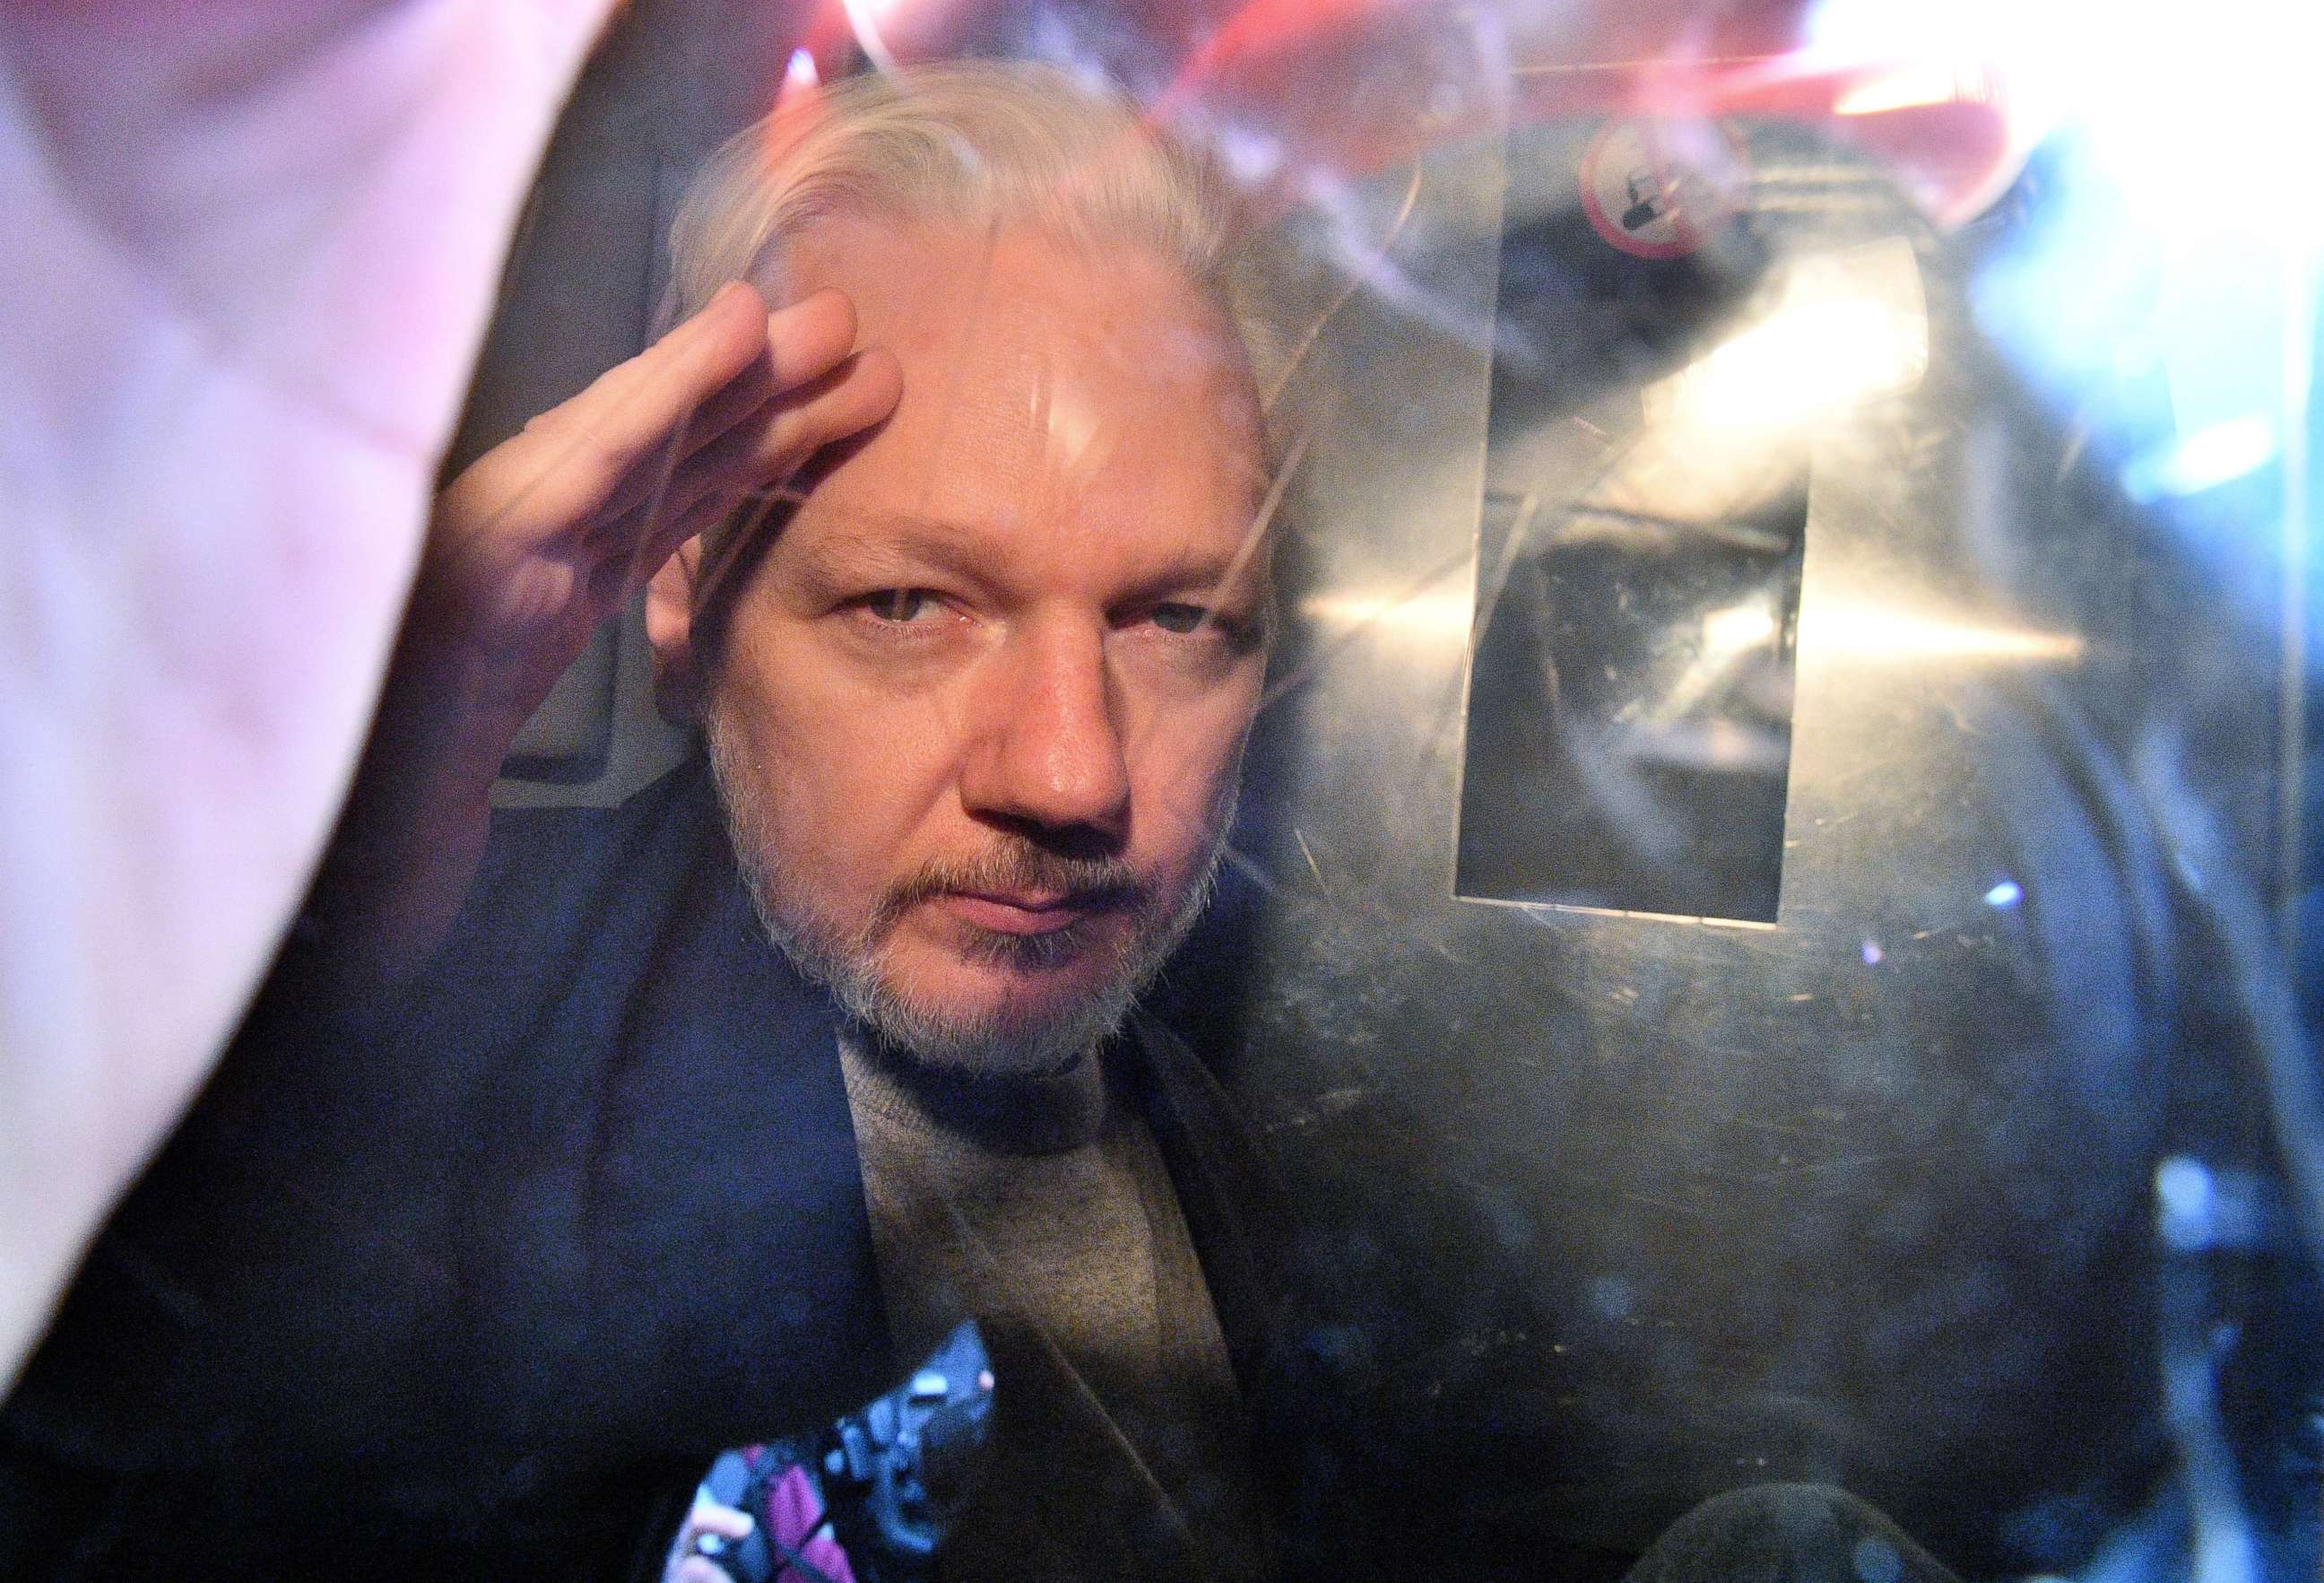 PHOTO: WikiLeaks founder Julian Assange gestures from the window of a prison van as he is driven out of Southwark Crown Court in London on May 1, 2019.